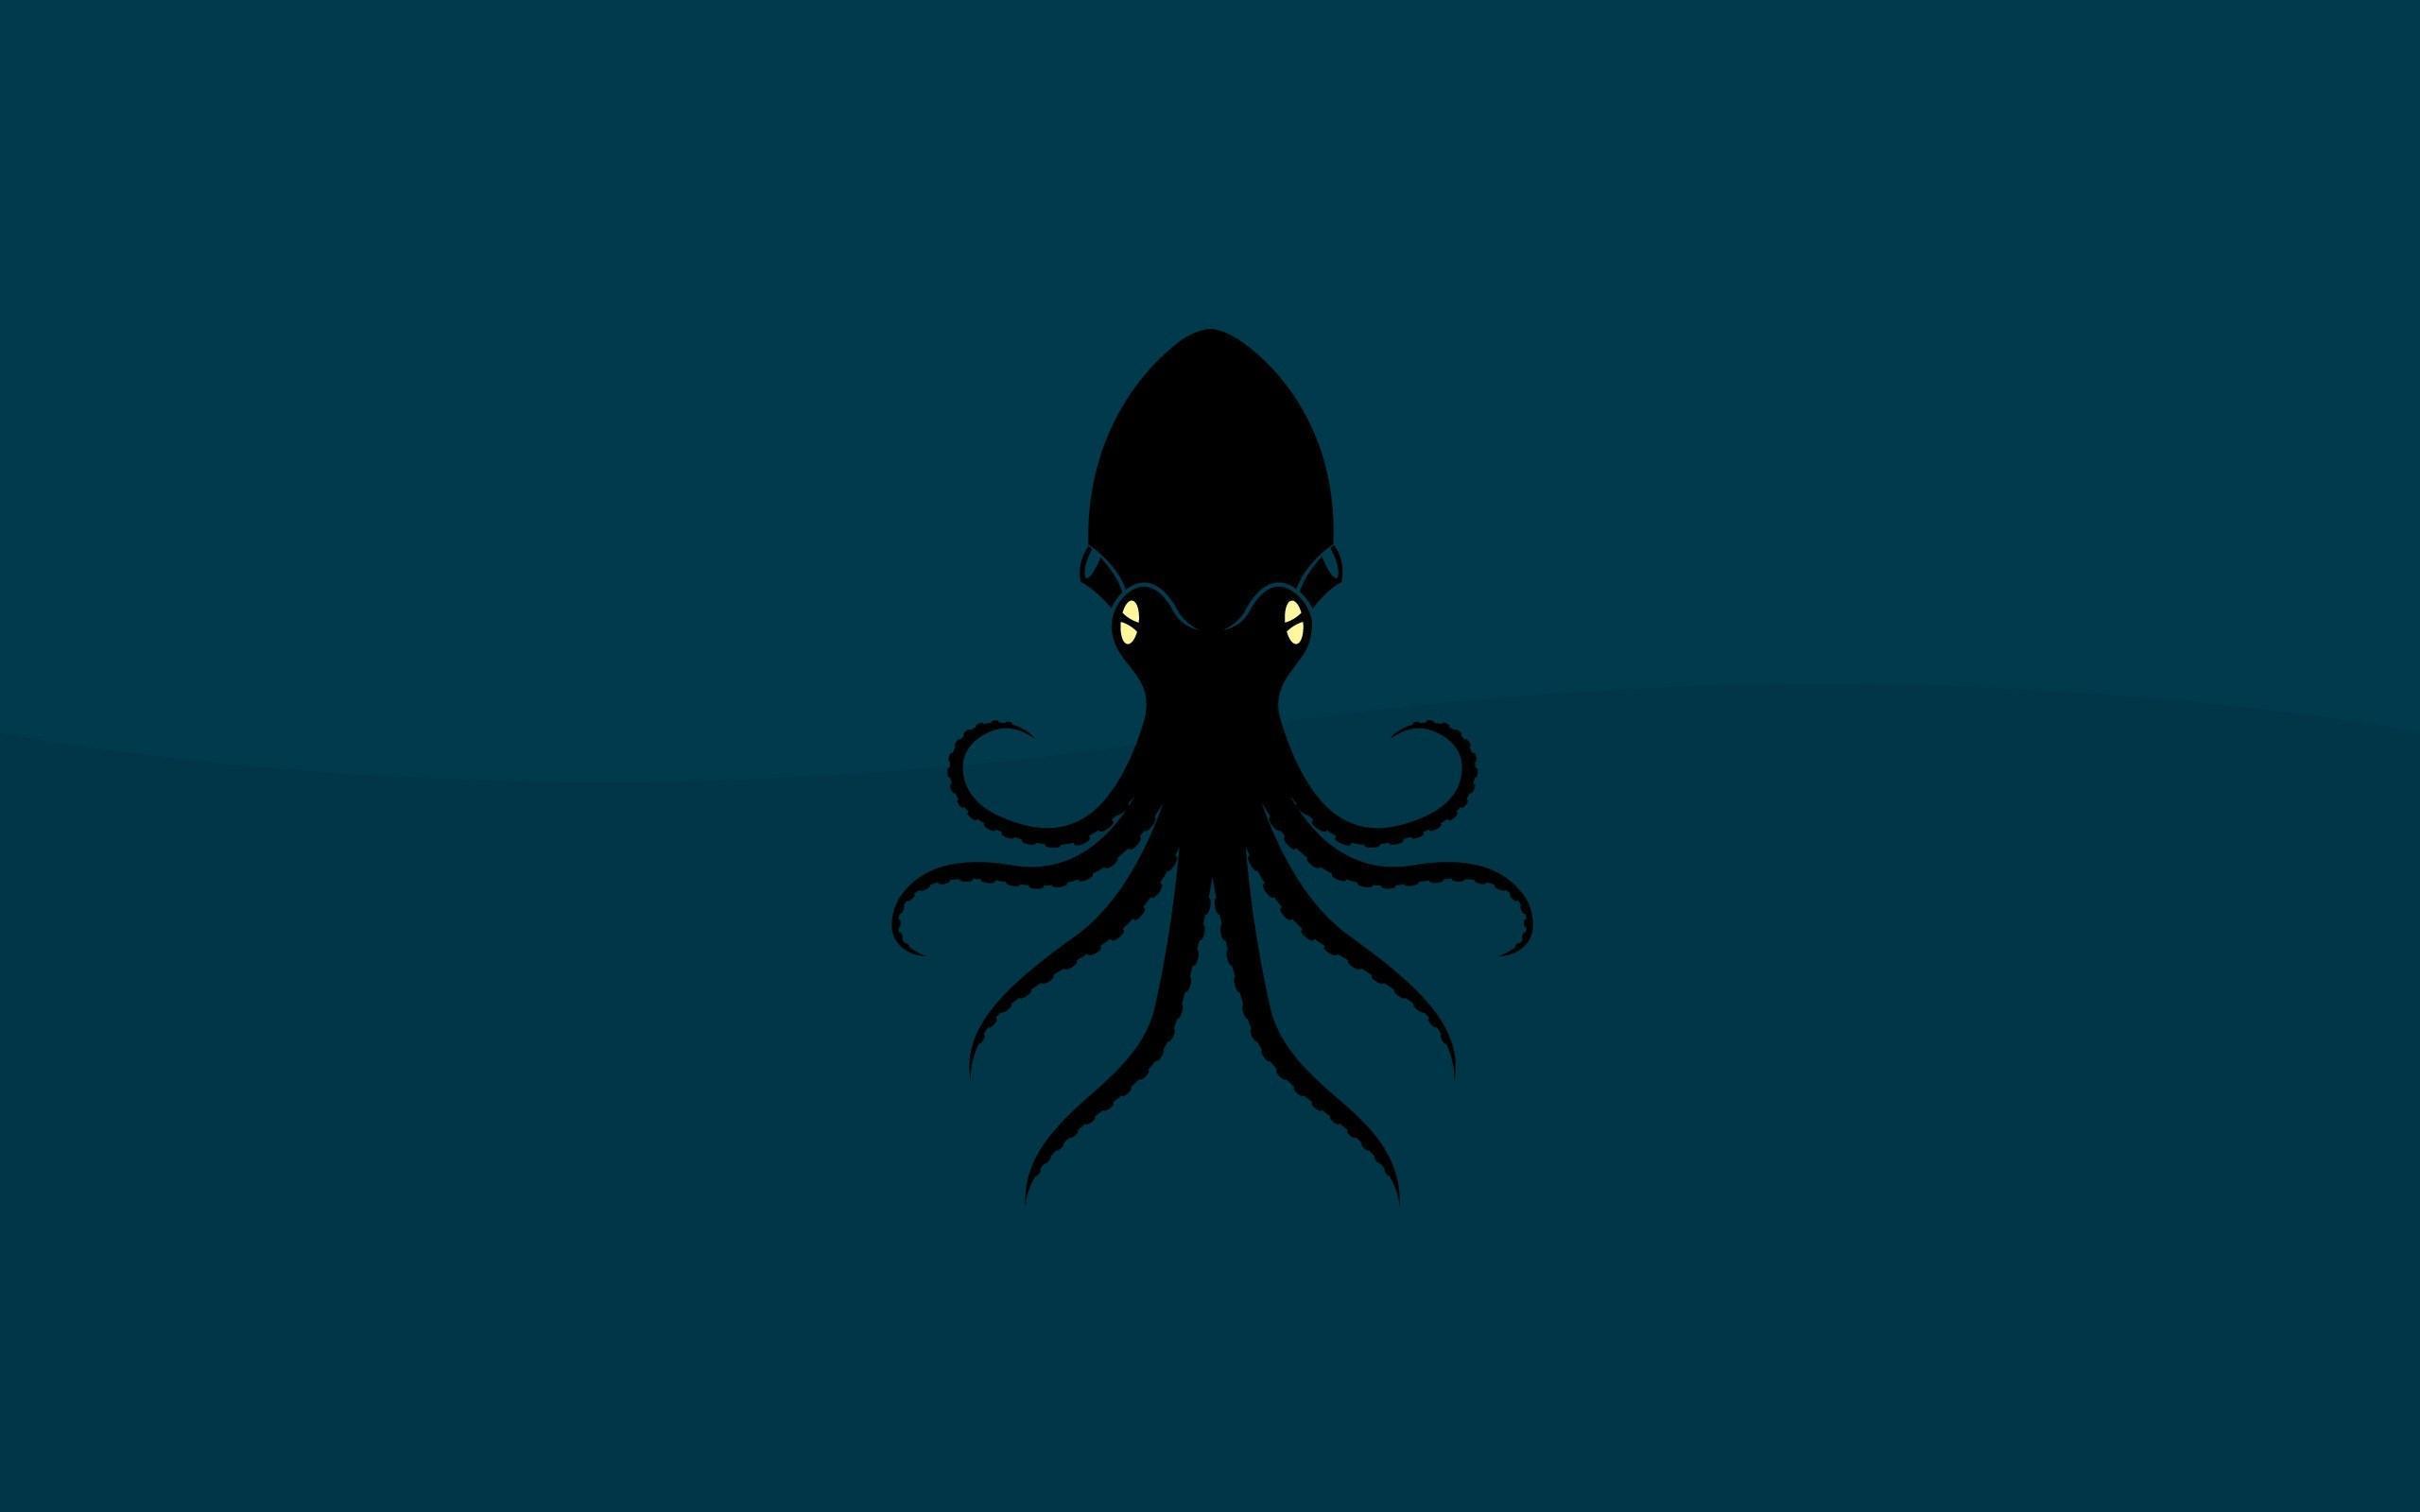 Octopus Live Wallpaper for Android